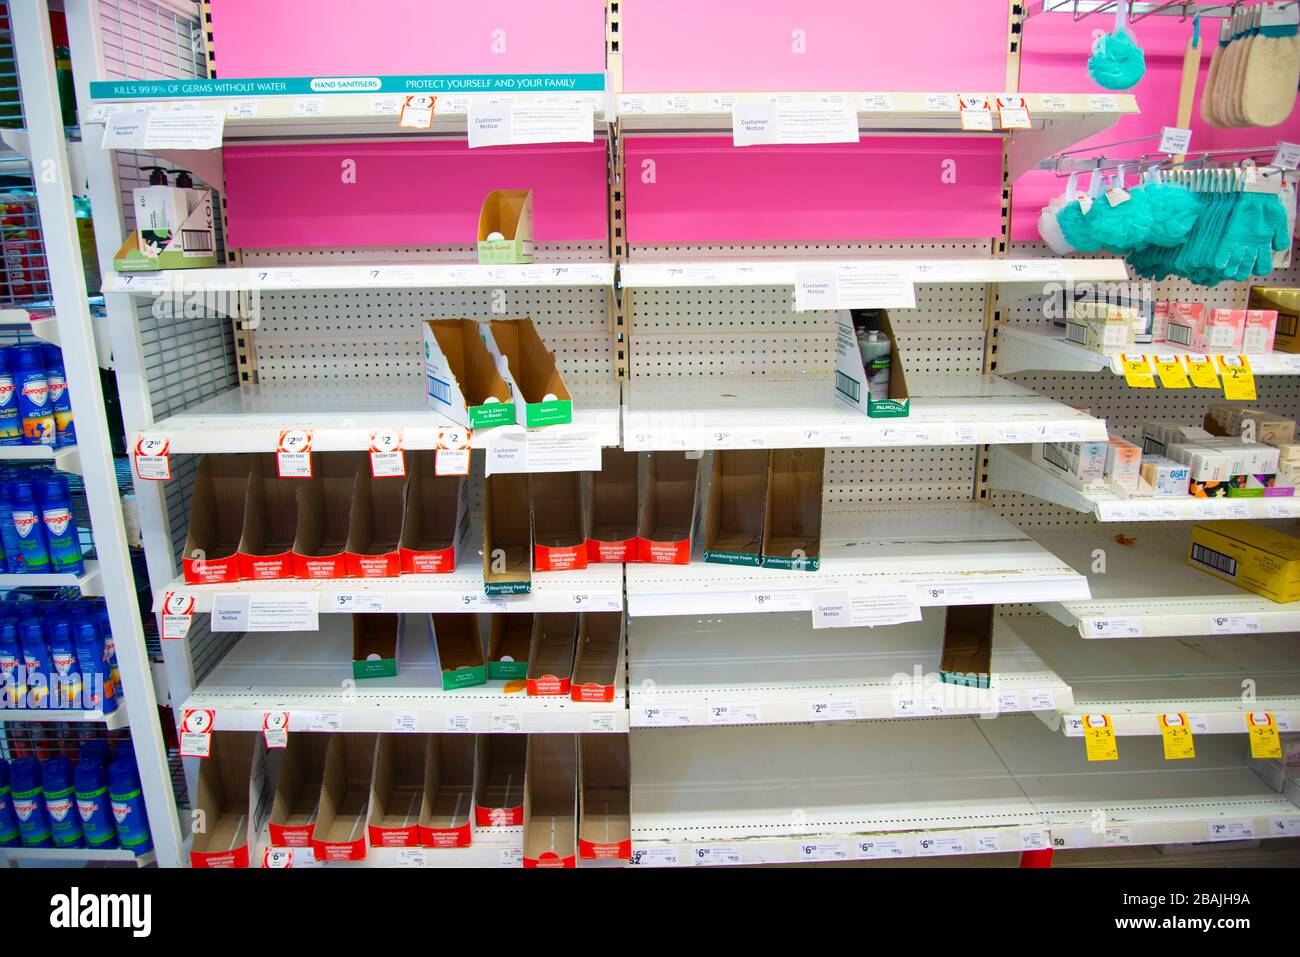 Perth, Australia - March 15, 2020: Supplies shortage at grocery store during the Coronavirus crisis Stock Photo